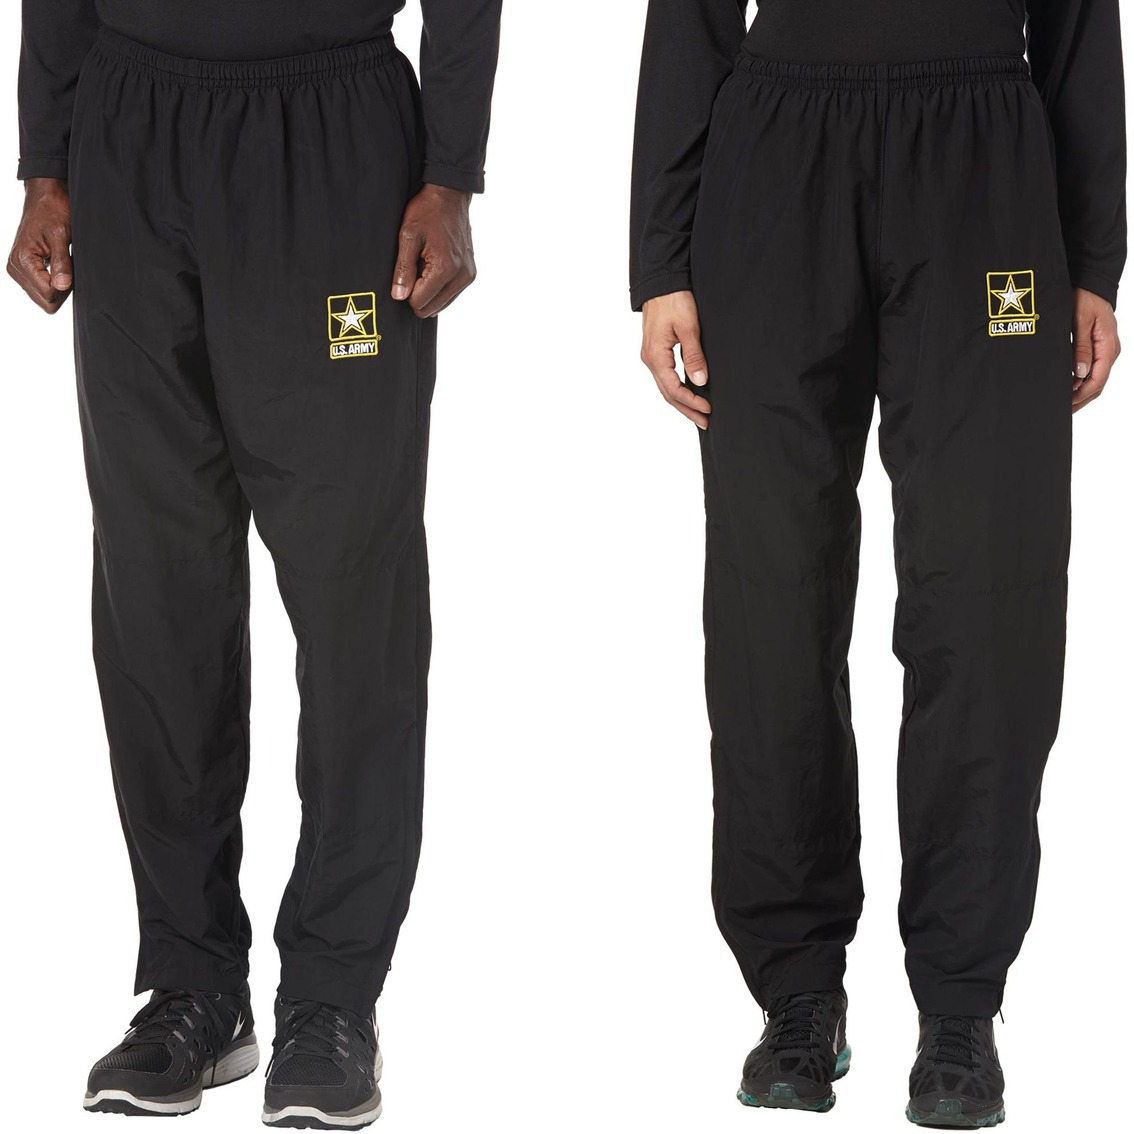 US Army Issue GI AFPU Men's & Women's Athletic Track Pants (Black) $28 + Free Shipping for Prime Members